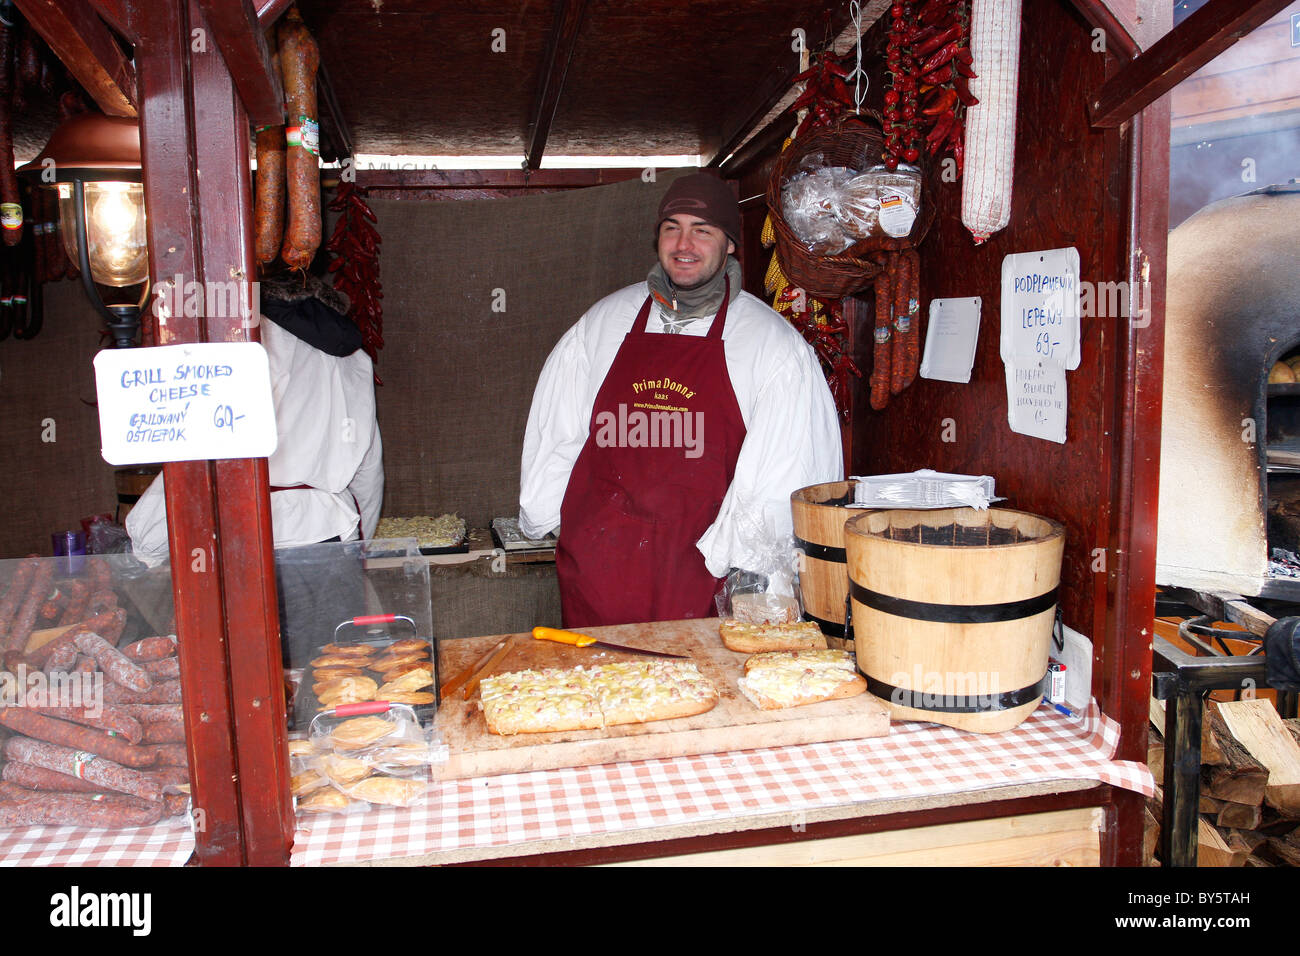 Food stall at  the Christmas market in  the Old Town Square,Prague,Czech Republic. Stock Photo